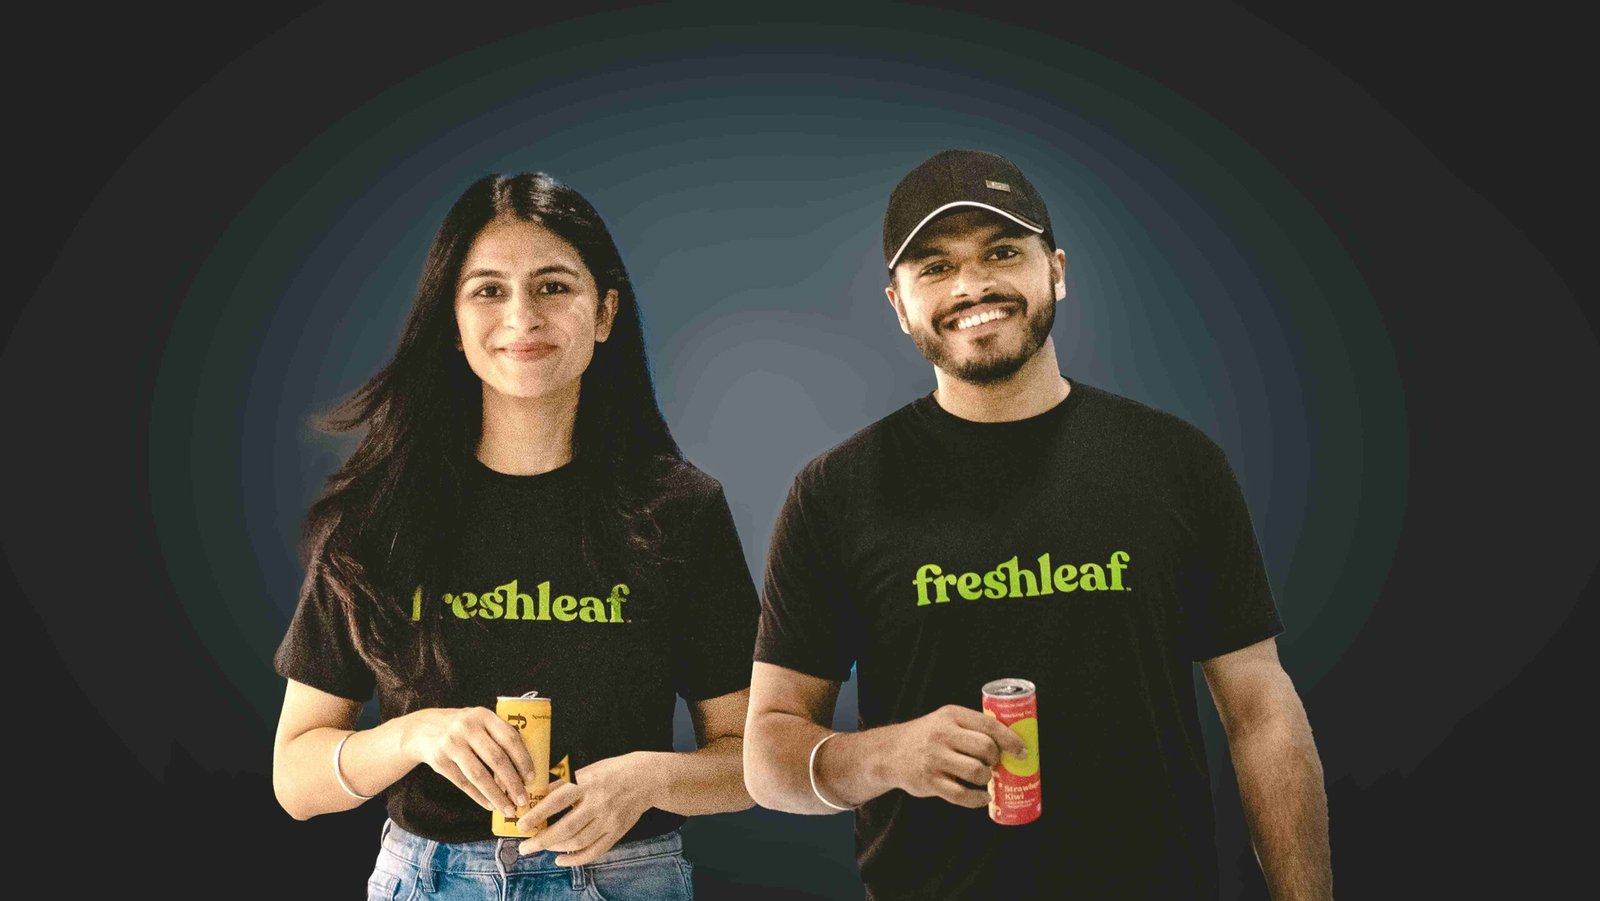 Freshleaf raises Rs 1 Cr in seed round led by Inflection Point Ventures